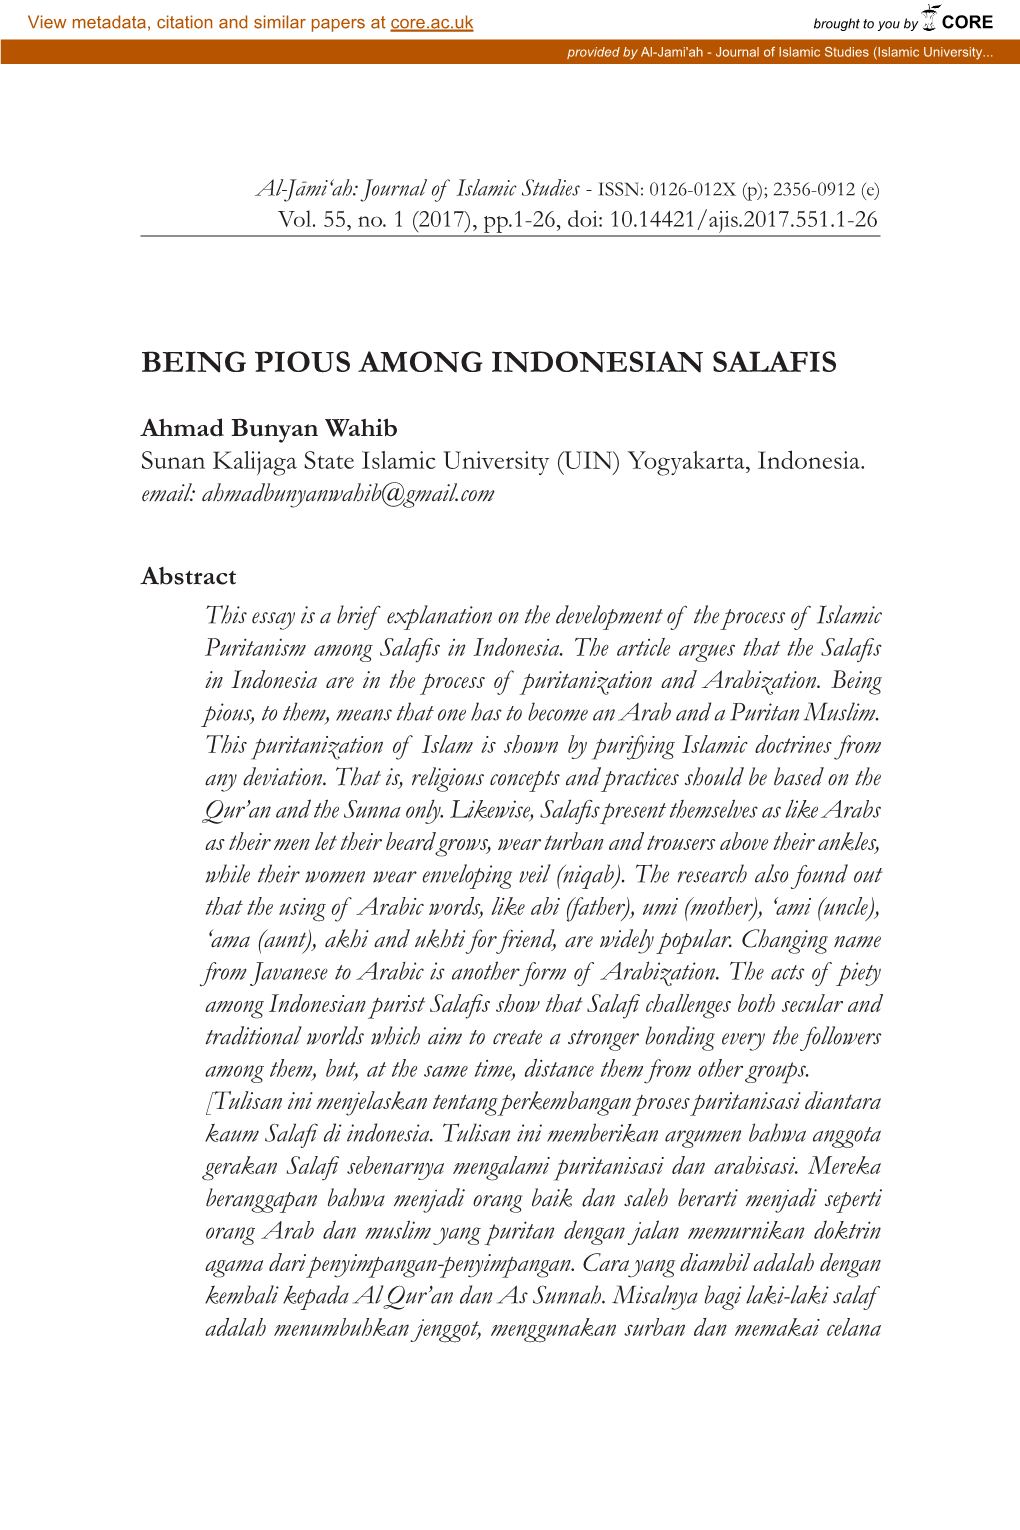 Being Pious Among Indonesian Salafis